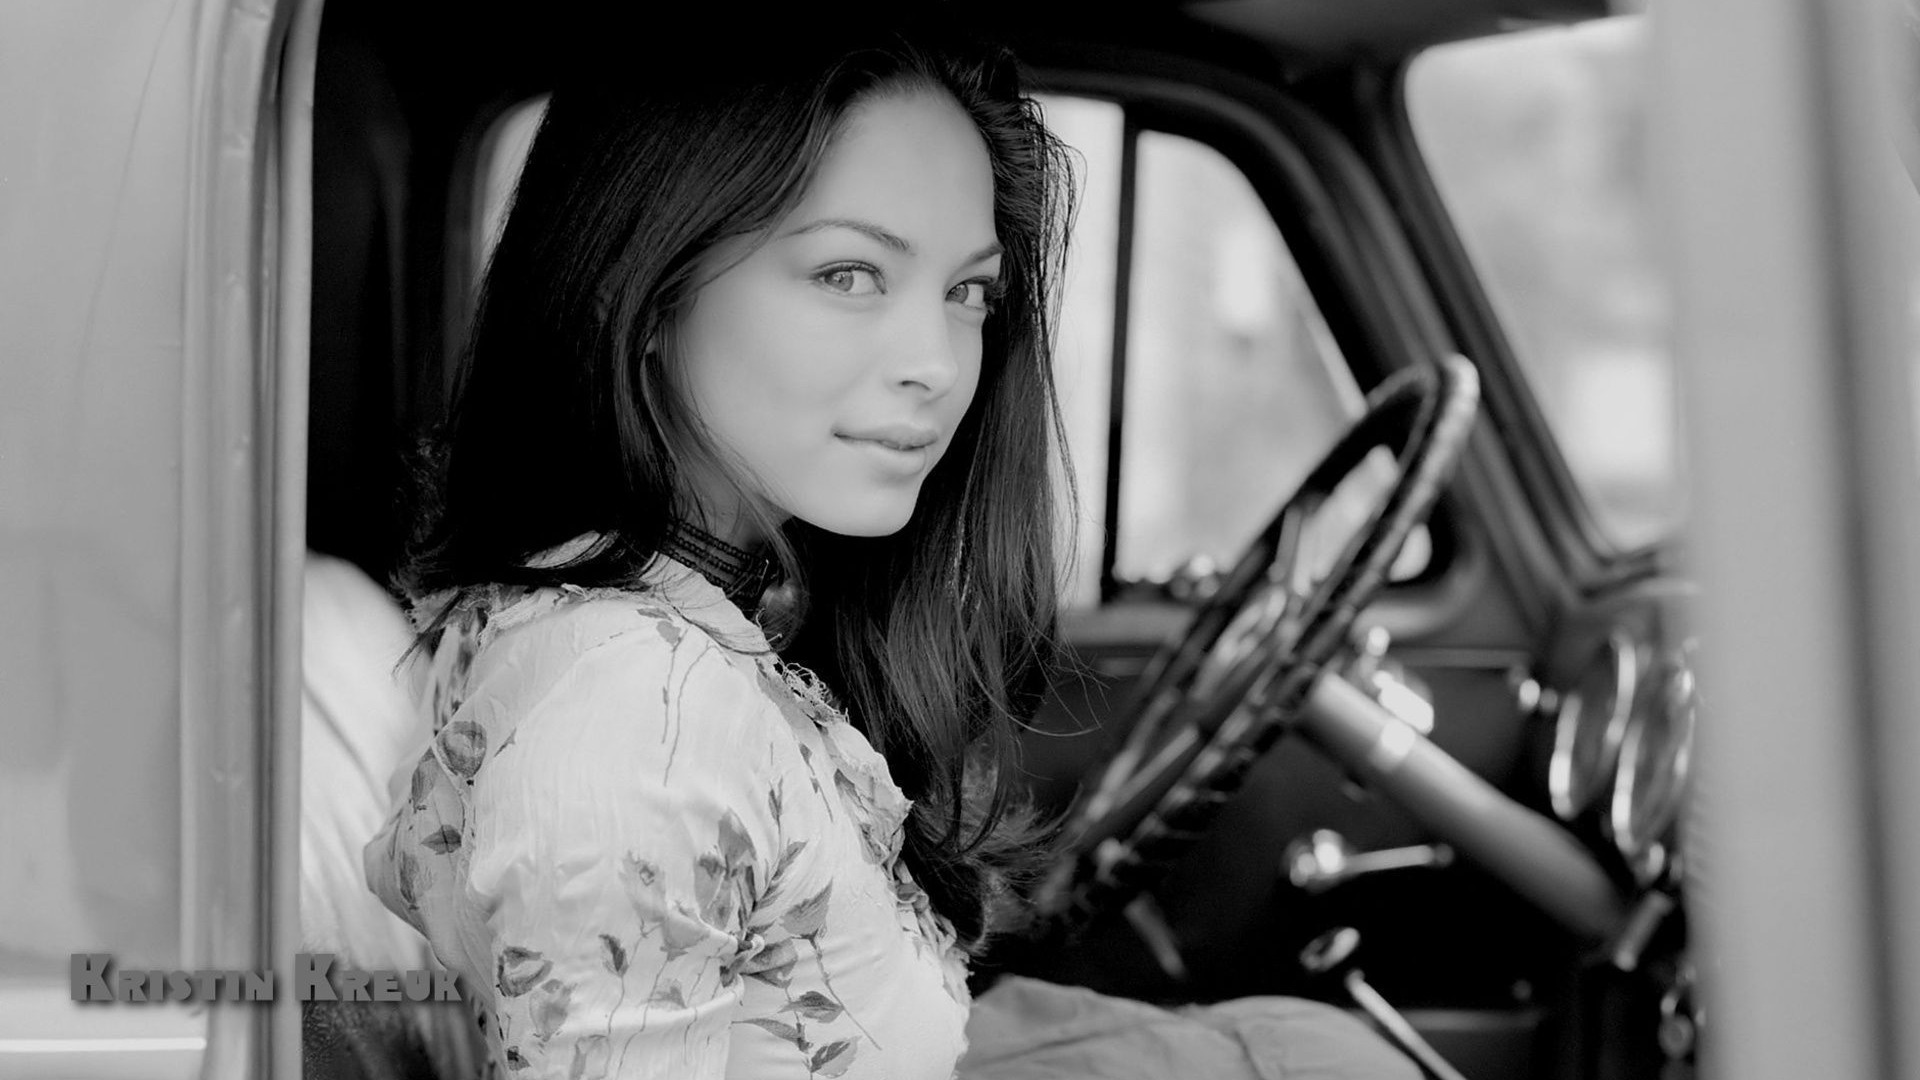 Kristin Kreuk #010 - 1920x1080 Wallpapers Pictures Photos Images